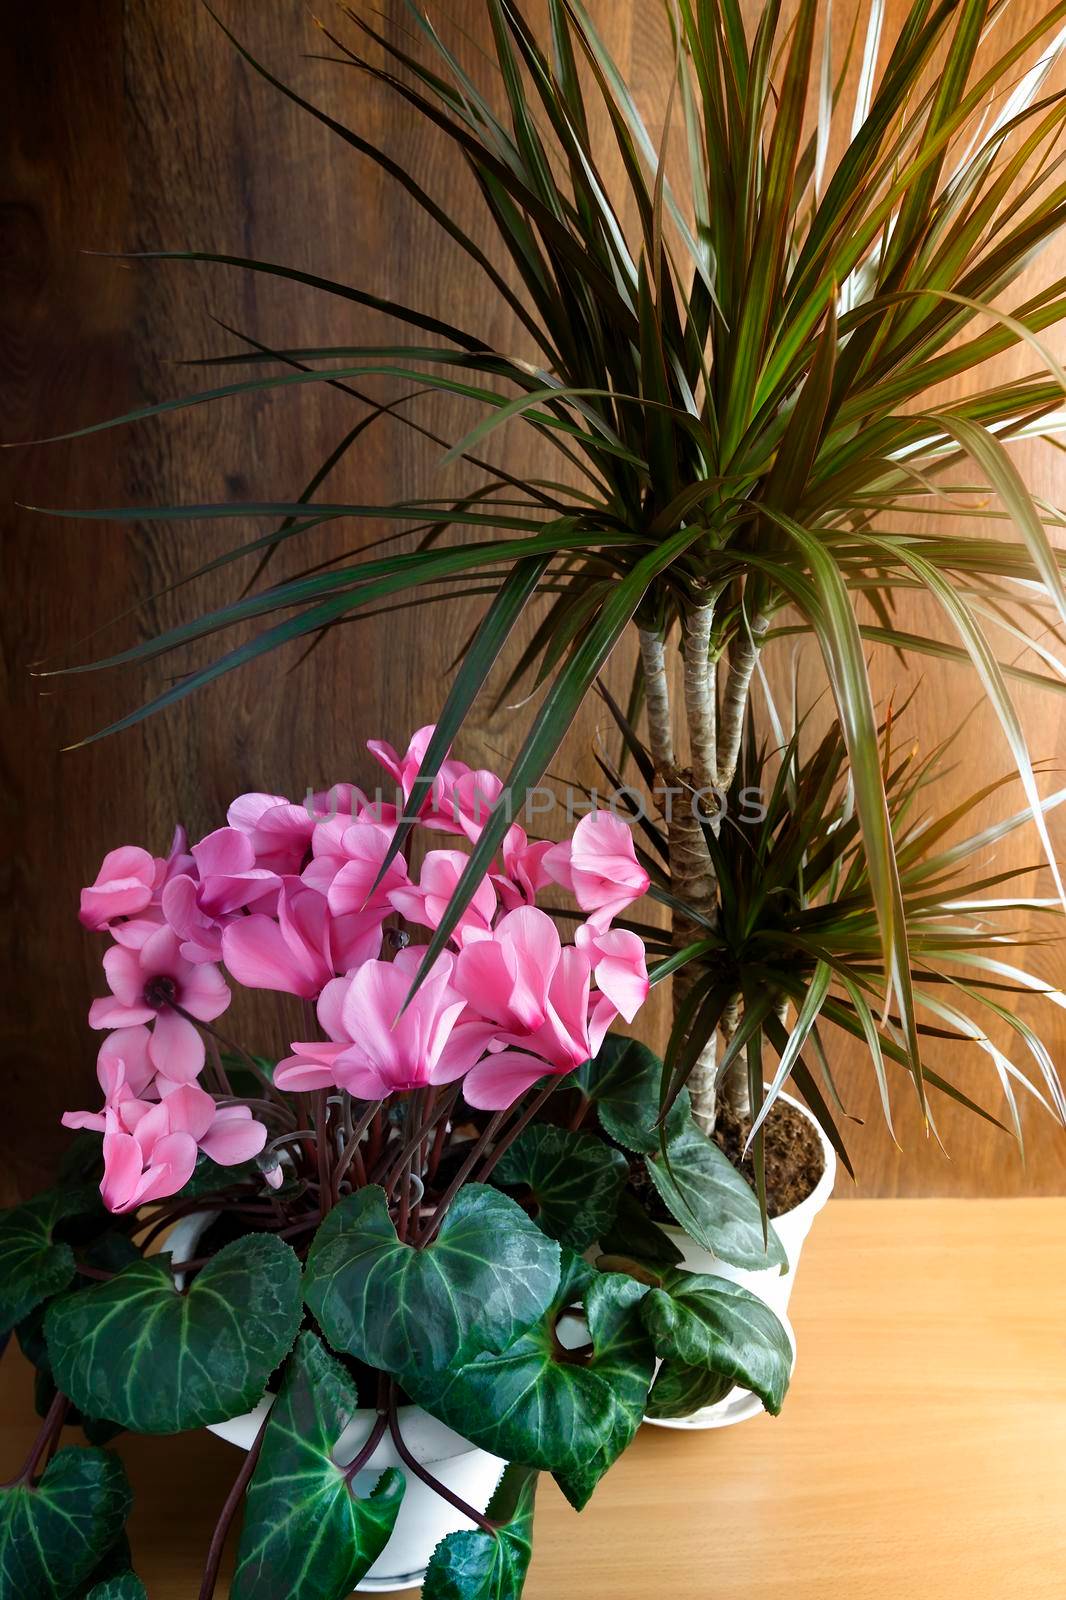 Potted flowers: blooming pink cyclamen and tropical plant dracaena.